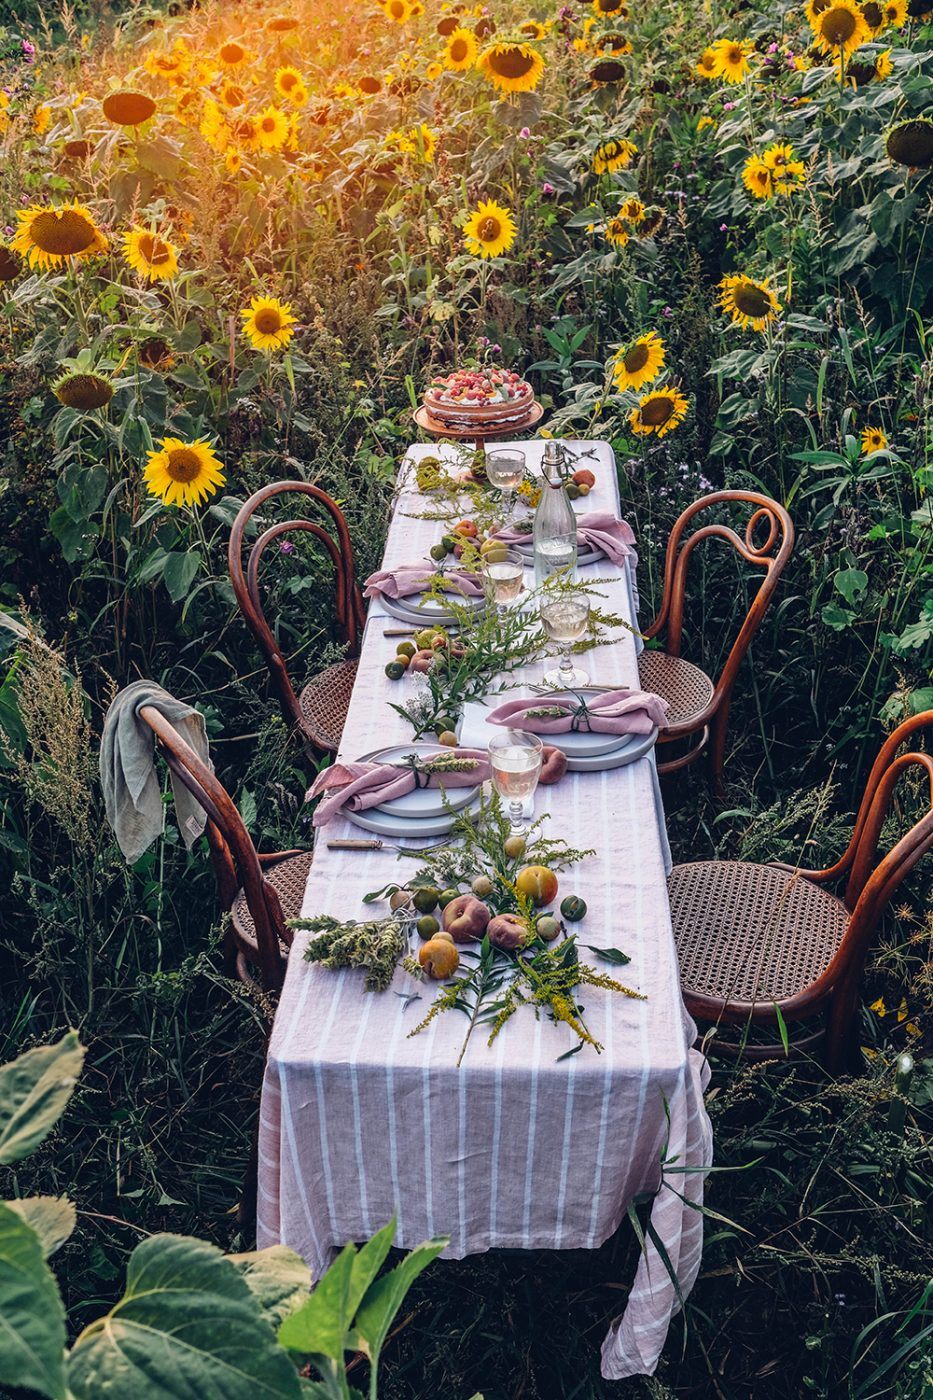 Image for Summer Gathering in a Field of Sunflowers